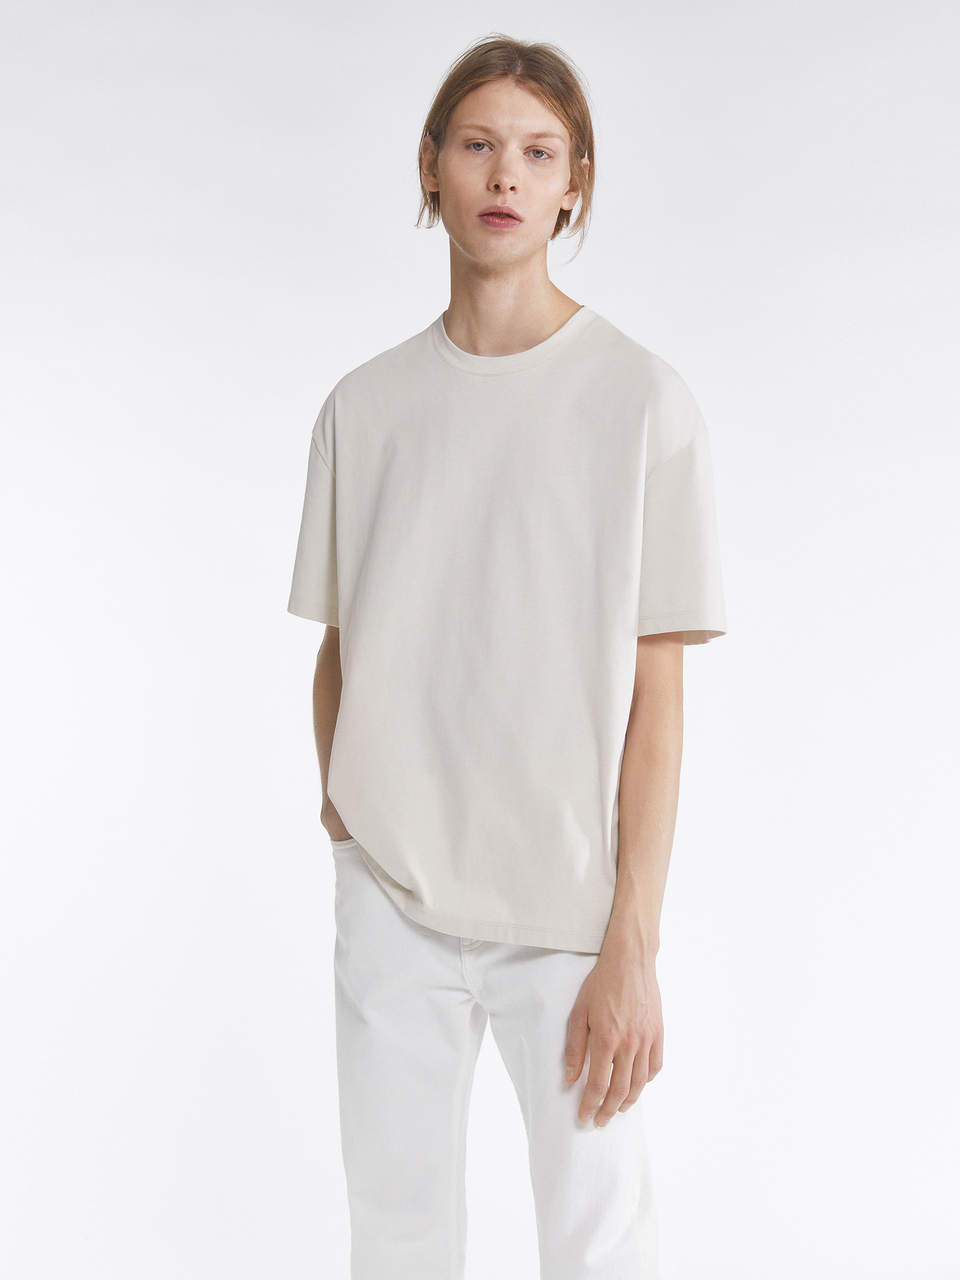 Brushed Cotton Tee